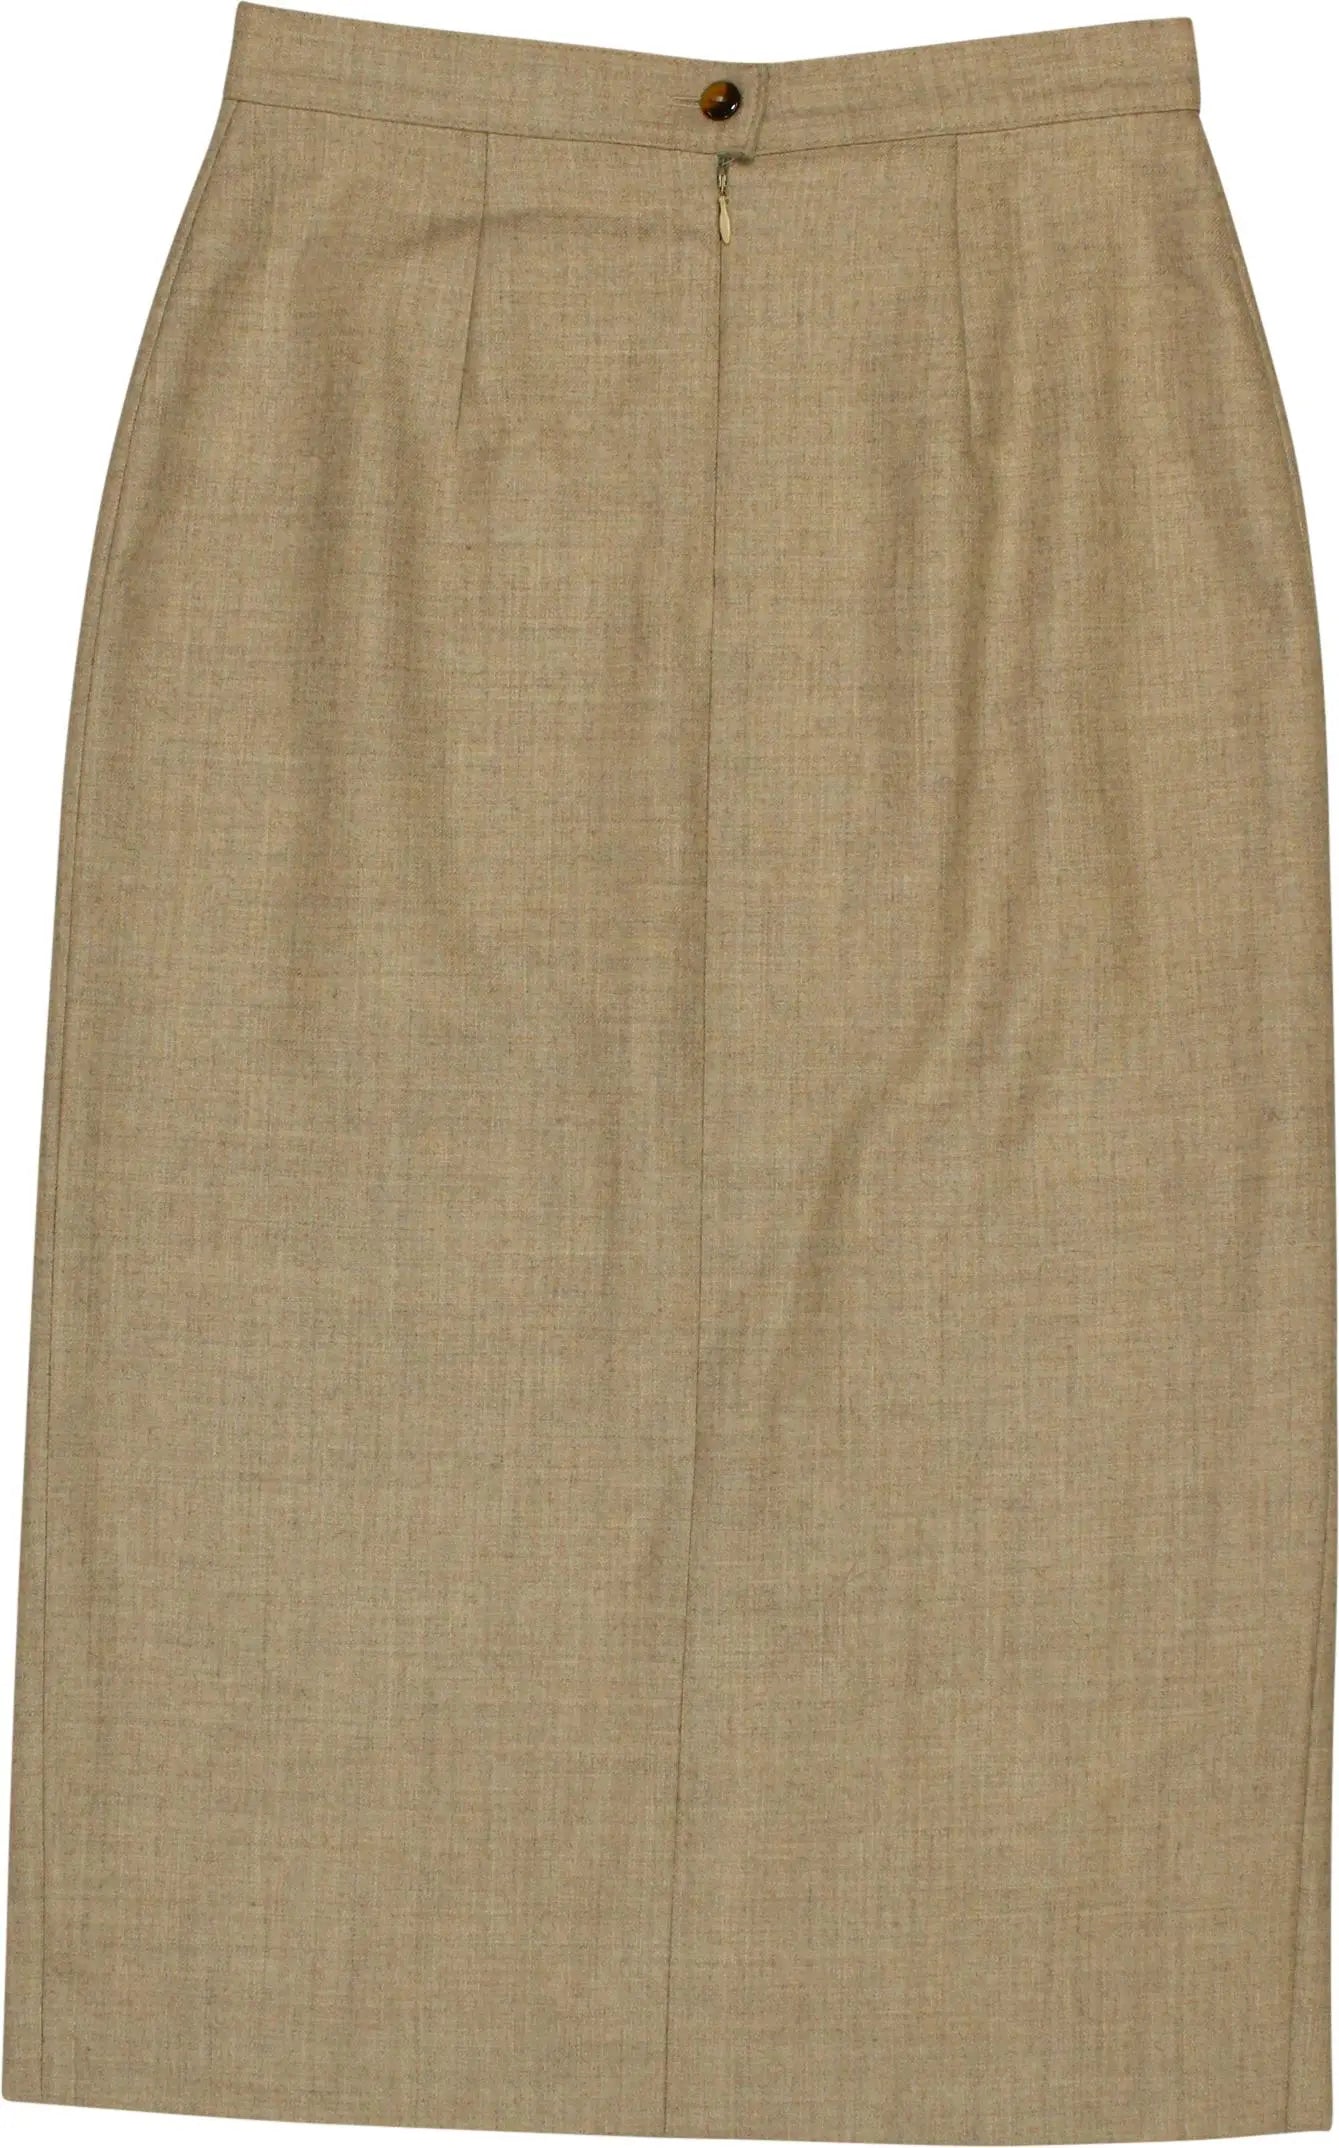 Unknown - Beige pencil skirt- ThriftTale.com - Vintage and second handclothing